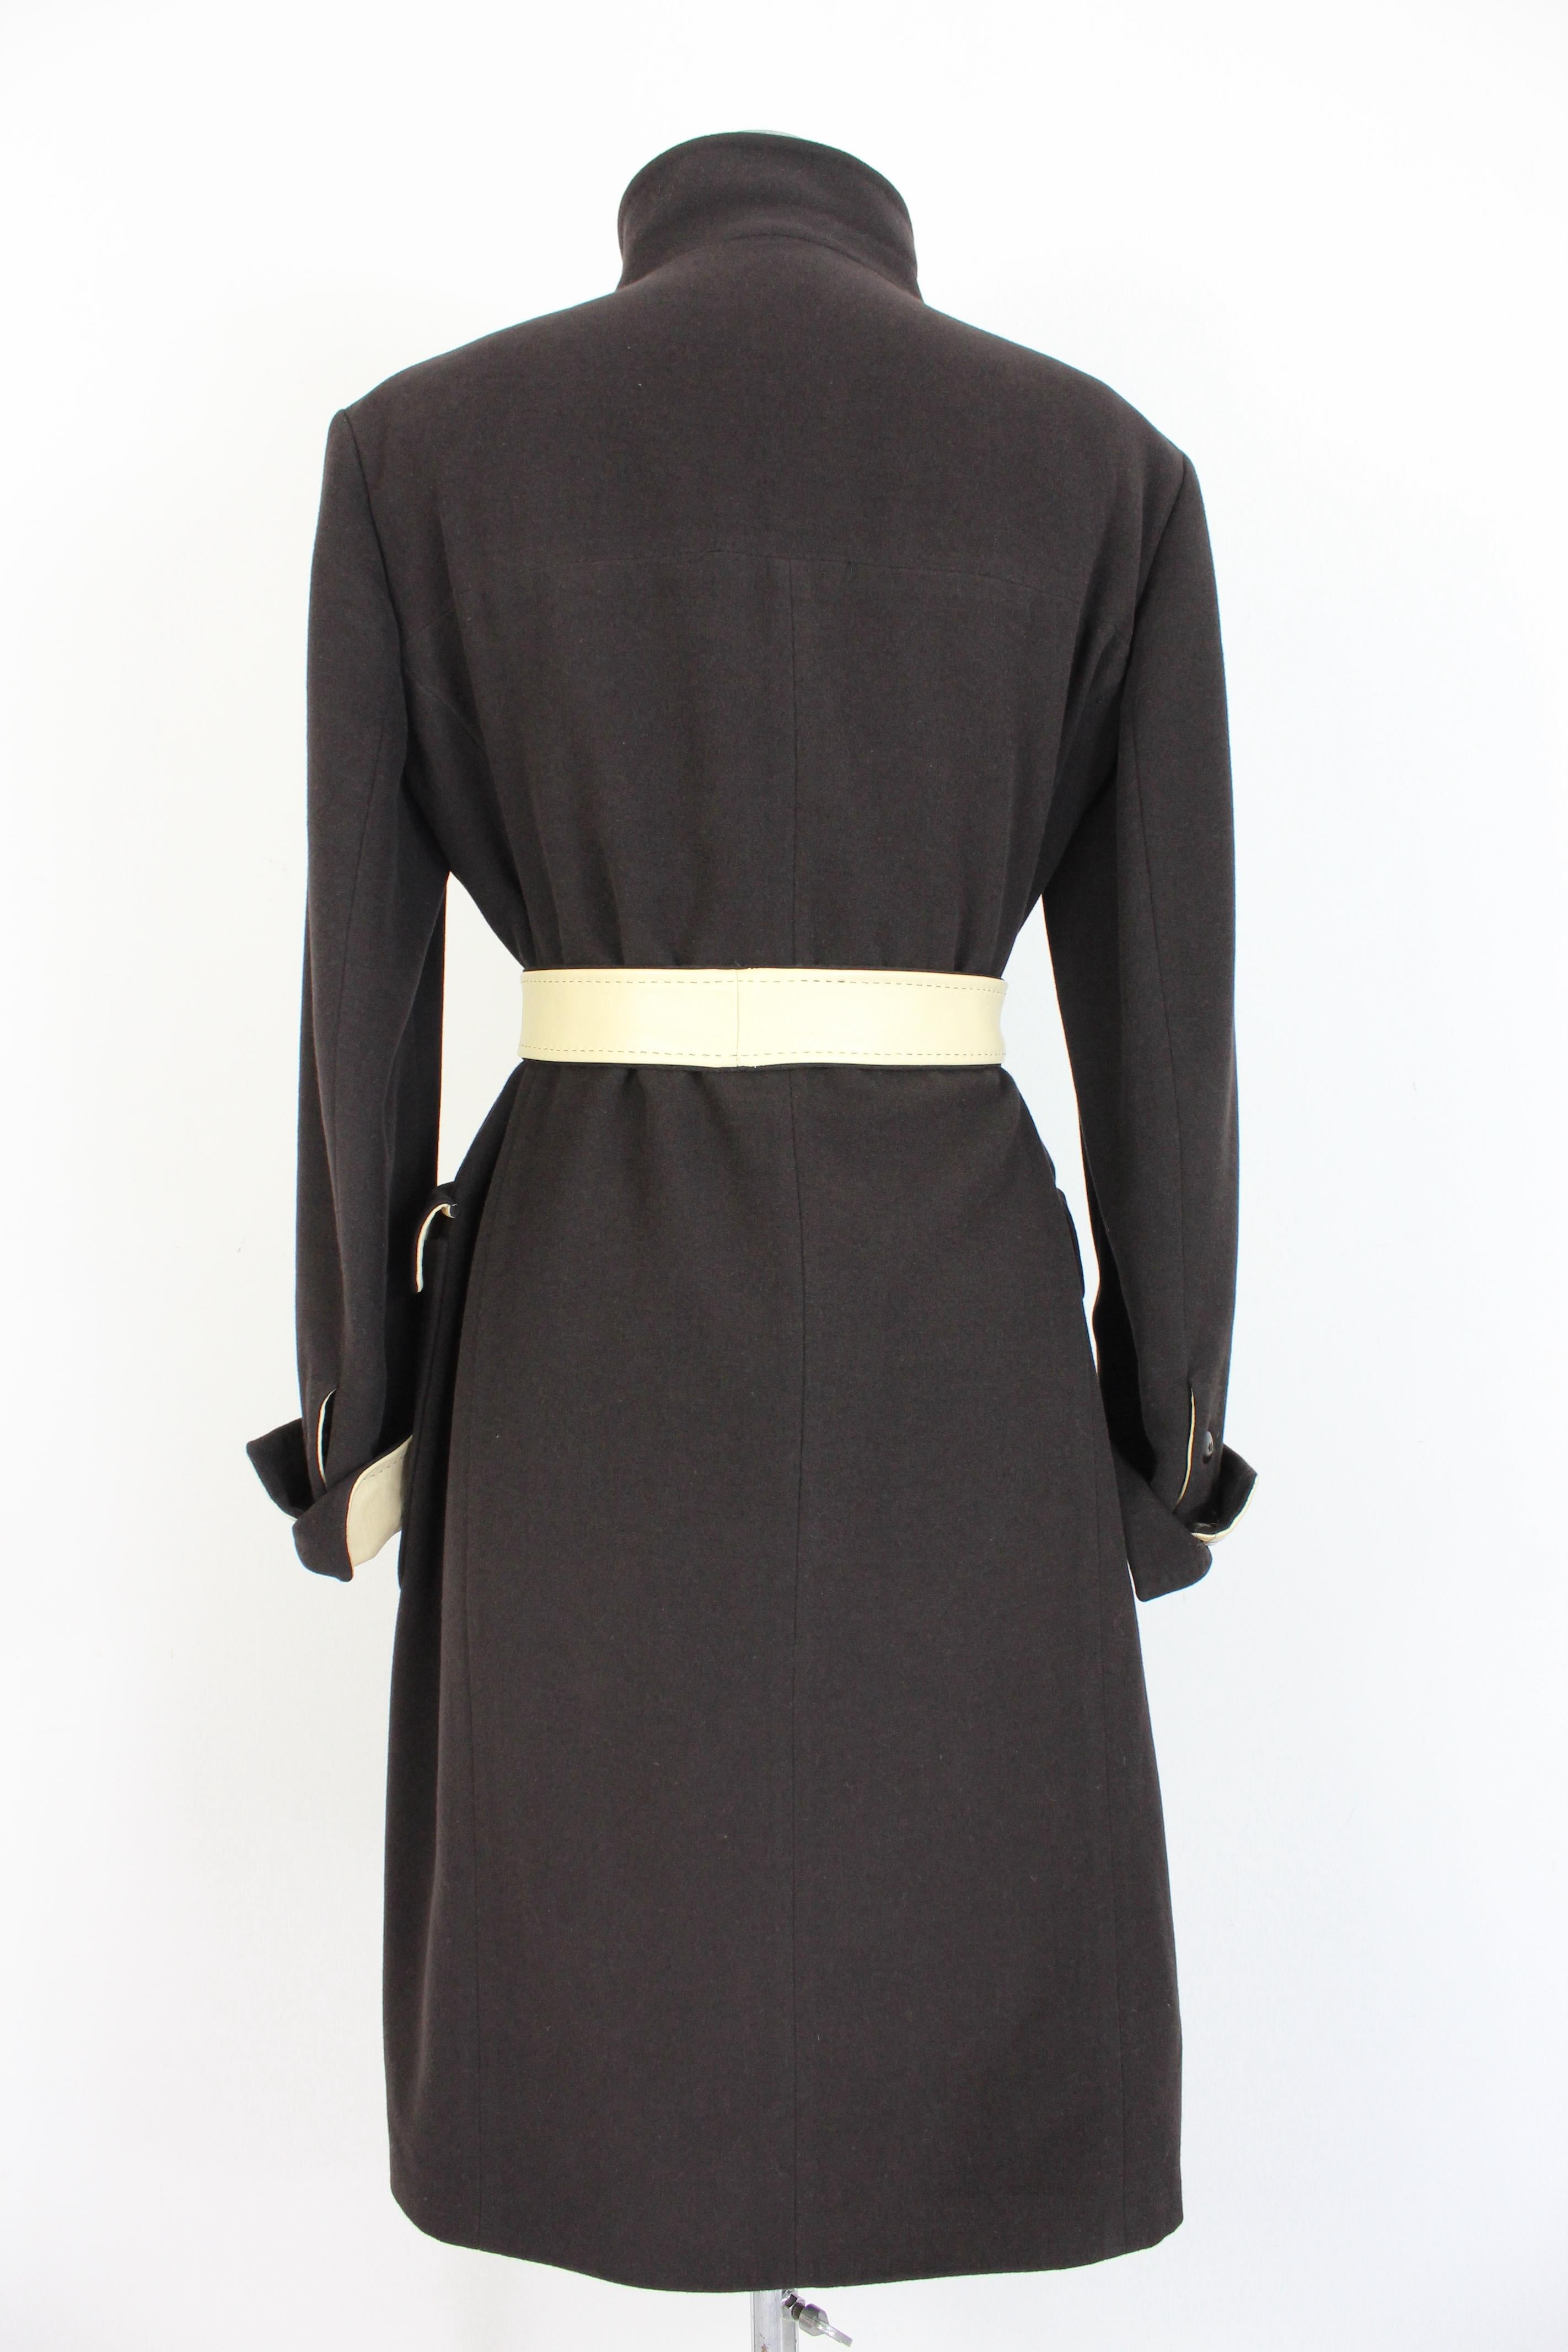 Hugo Boss vintage 2000s women's coat. Long, classic coat, black color and beige leather inserts. There is the possibility of closing the high collar, belt at the waist. Fabric 32% angora, 32% wool, 36% cashgora, internally lined 100% cupro. Made in